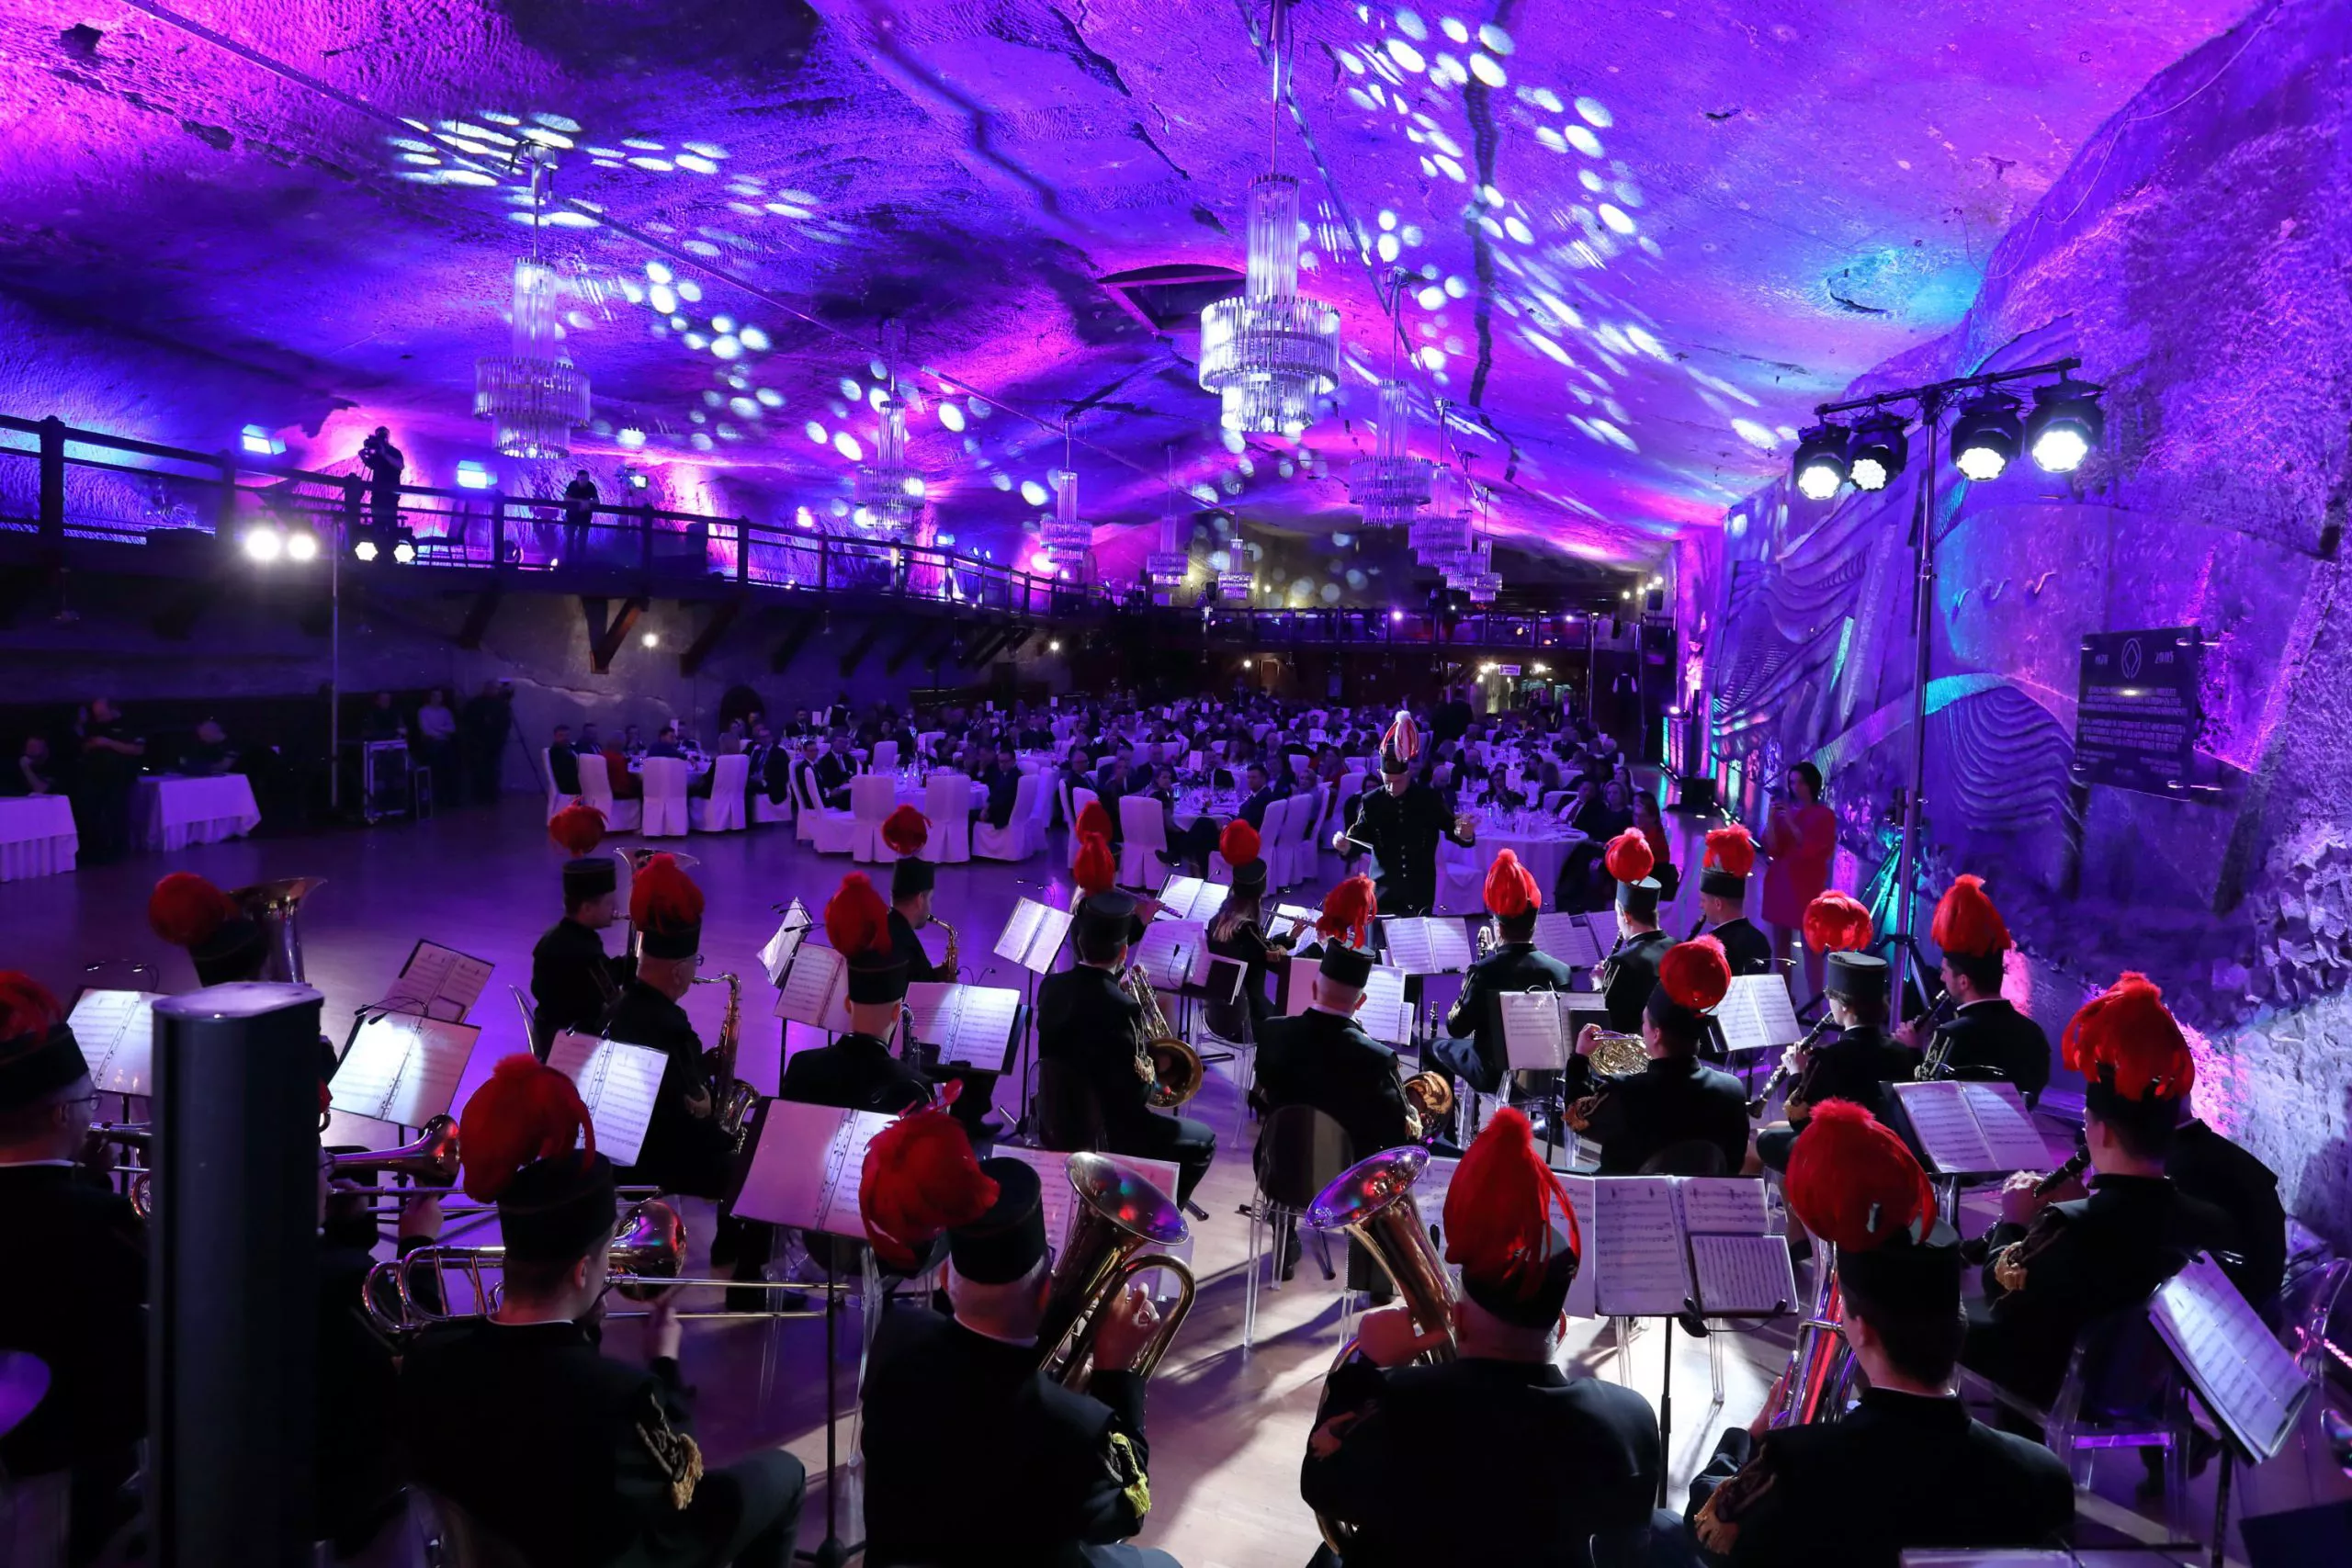 An event in a grand subterranean hall seen from behind the orchestra in traditional mining dresses including tall black caps with red plumes.